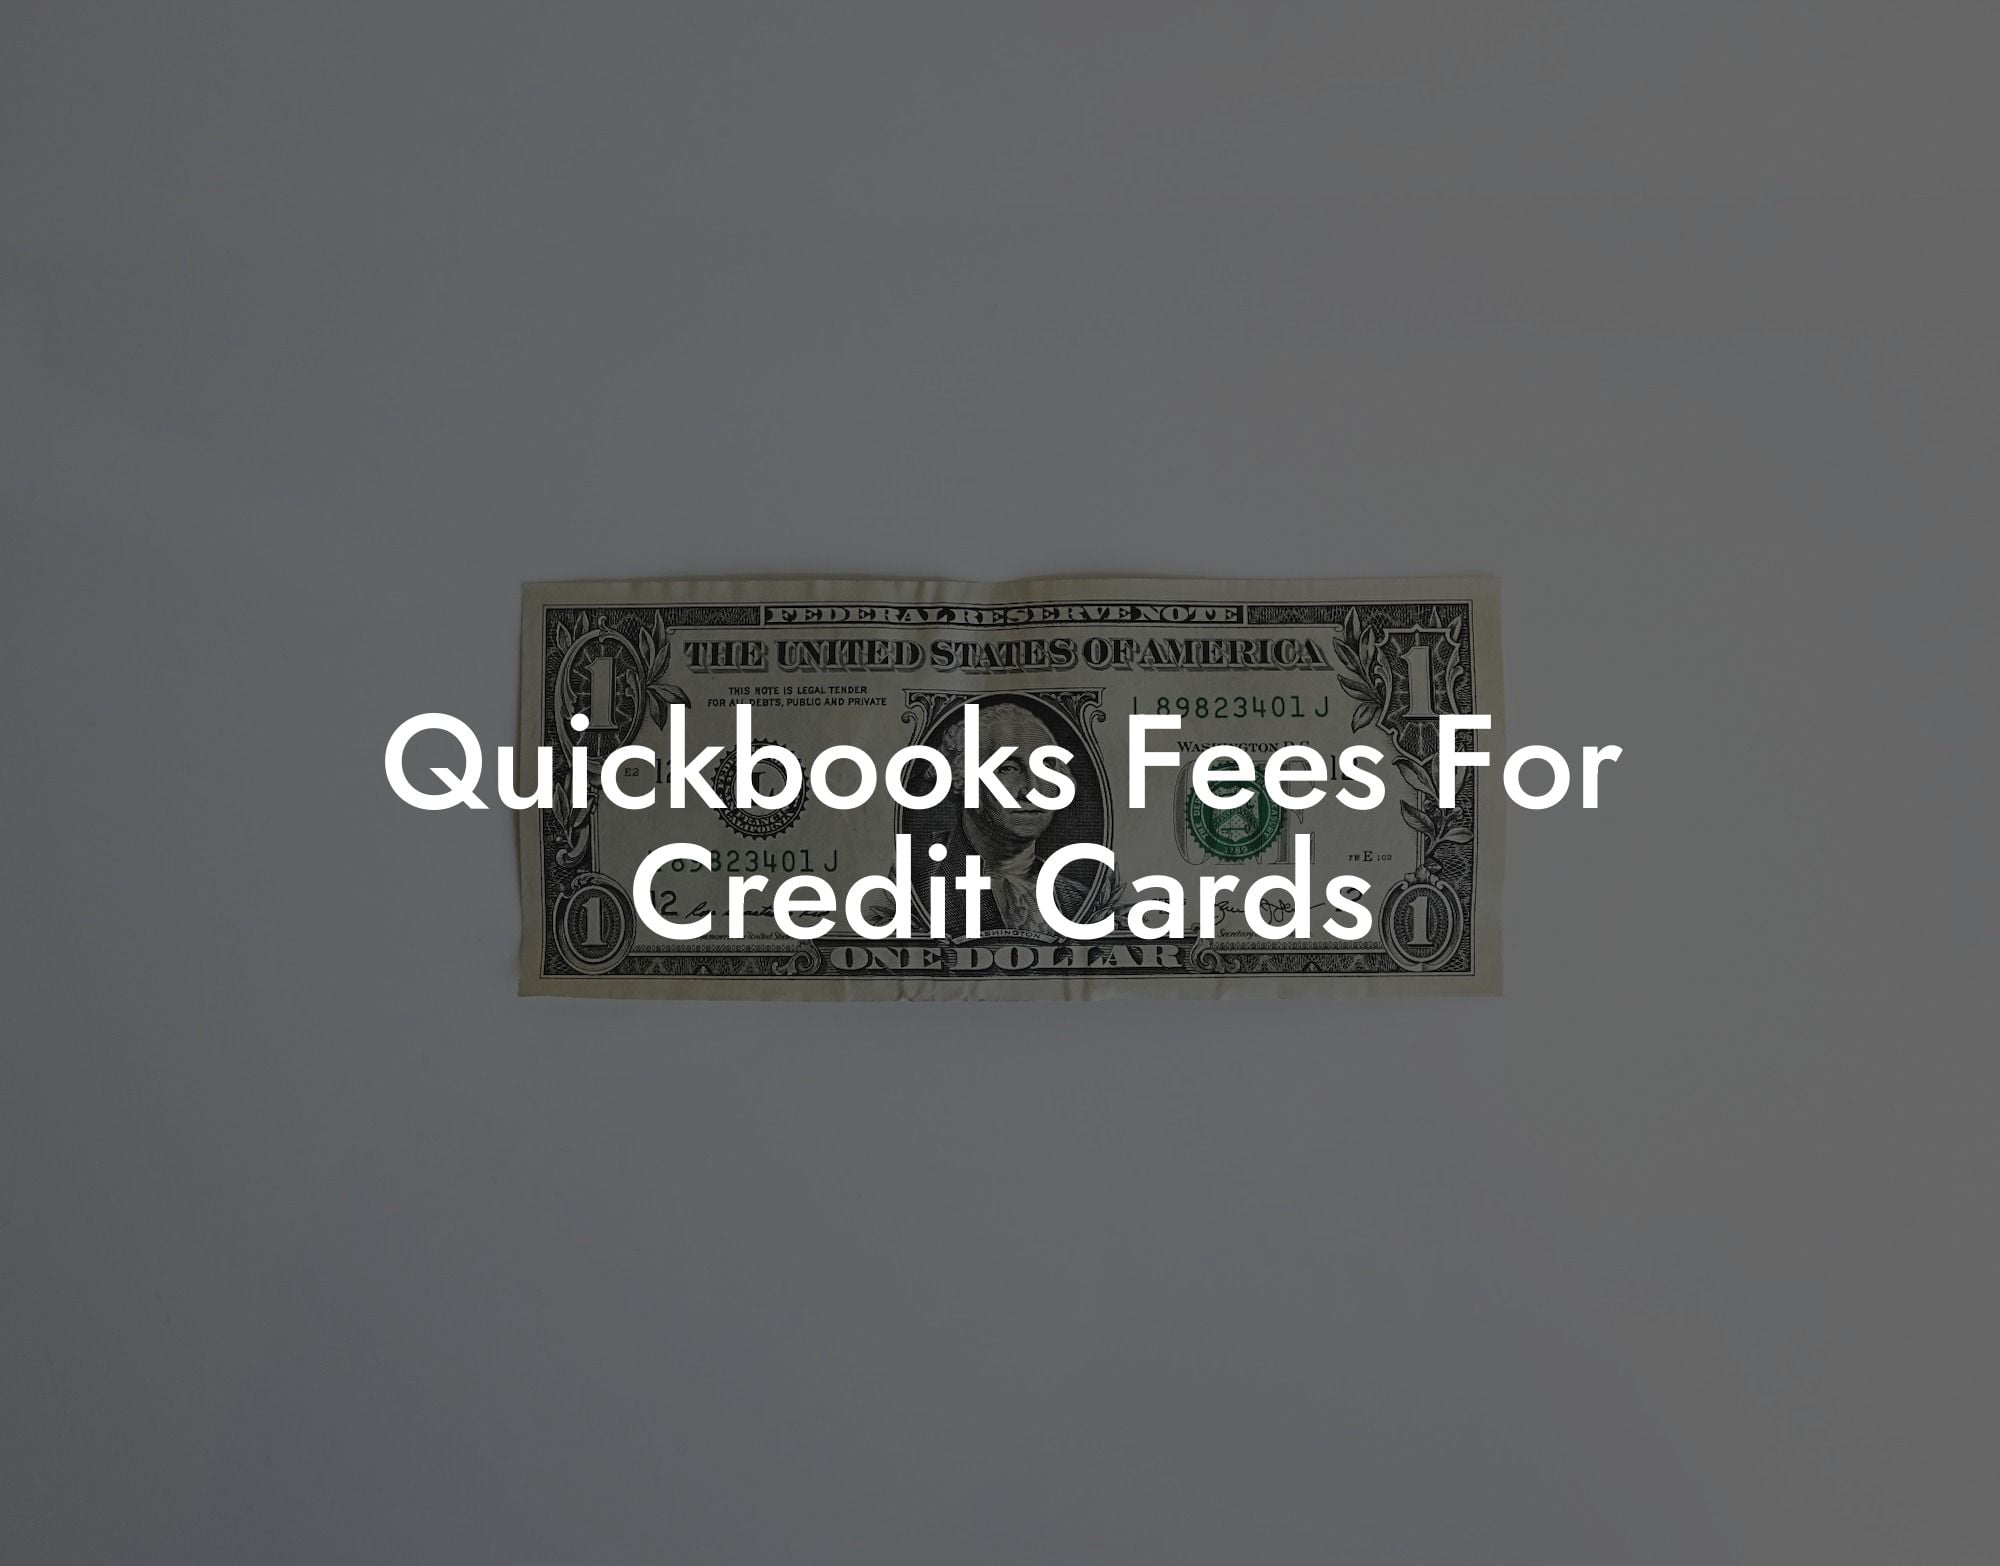 Quickbooks Fees For Credit Cards